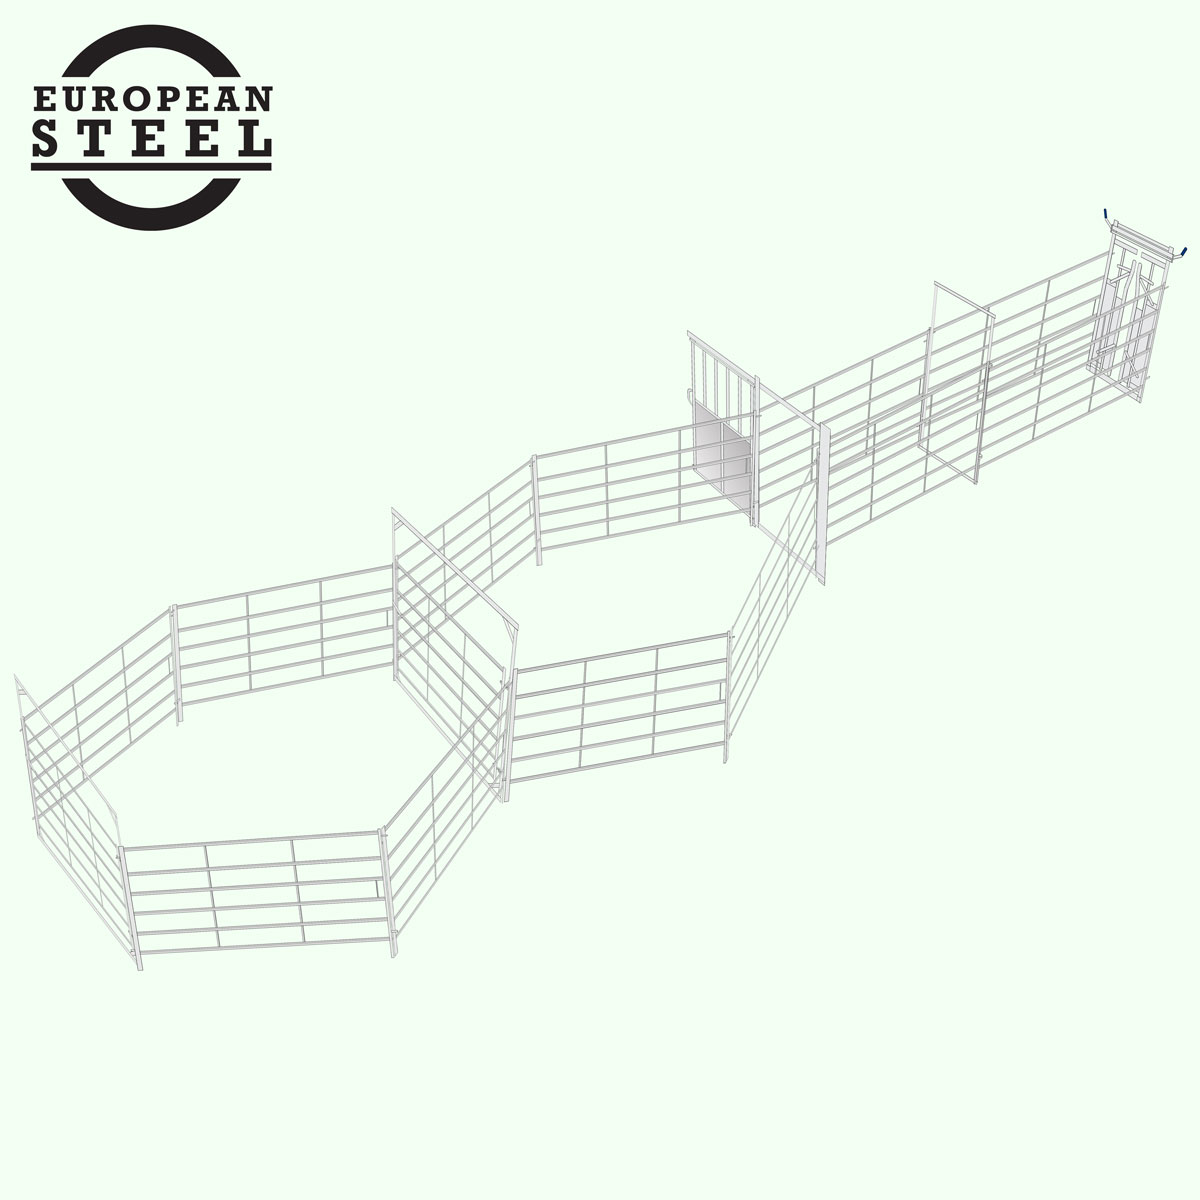 Cattle yards: Easy Handler AUTO up to 30 head